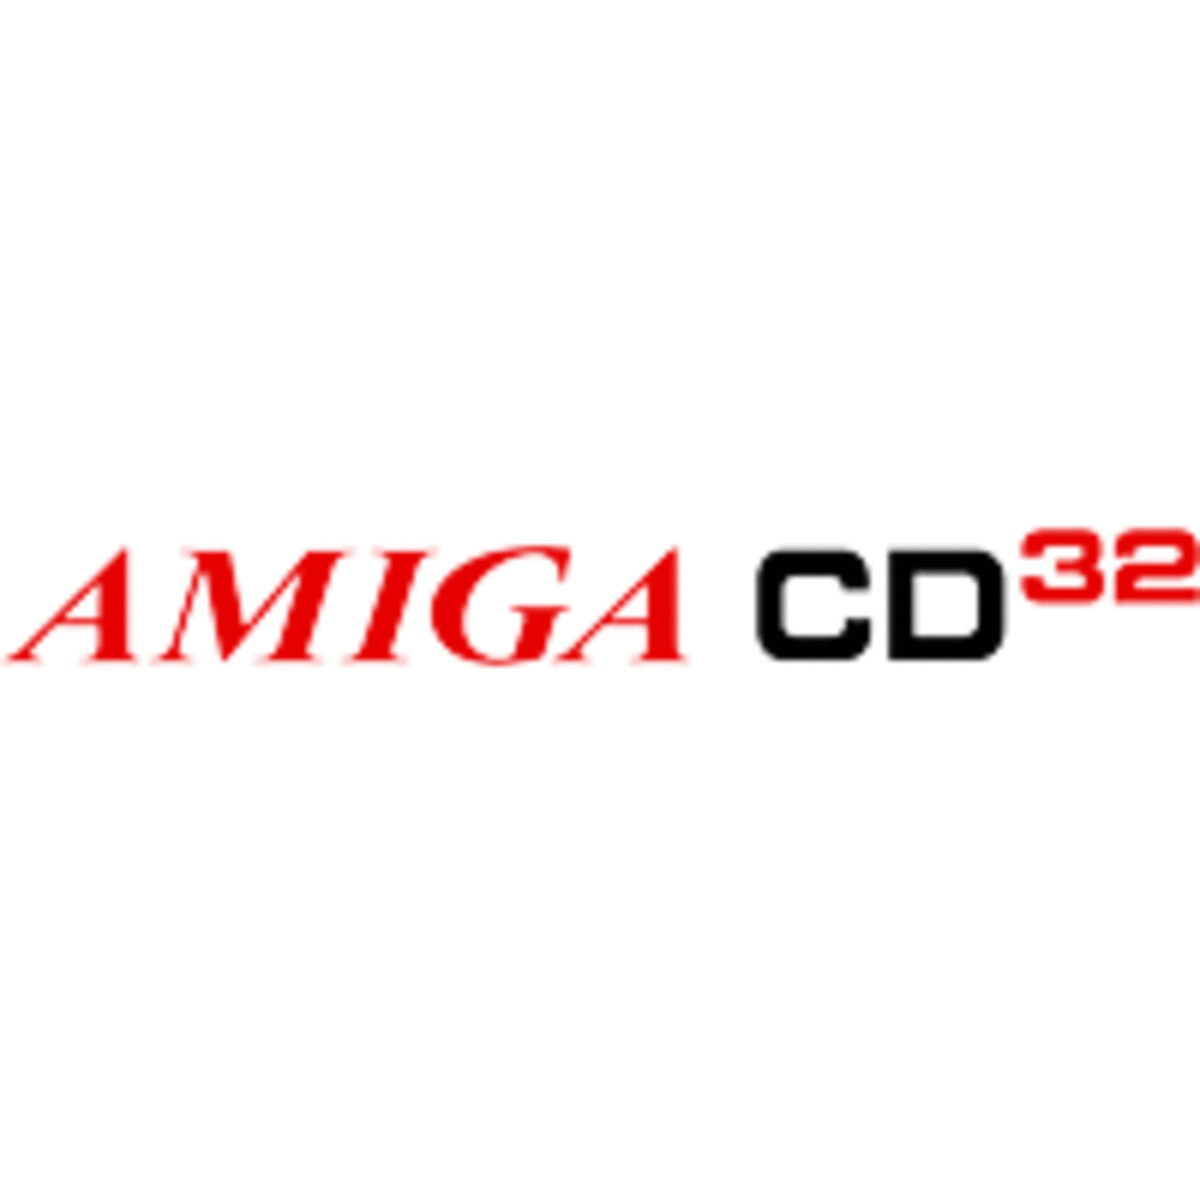 The Amiga brand was nicely restyled for the CD 32